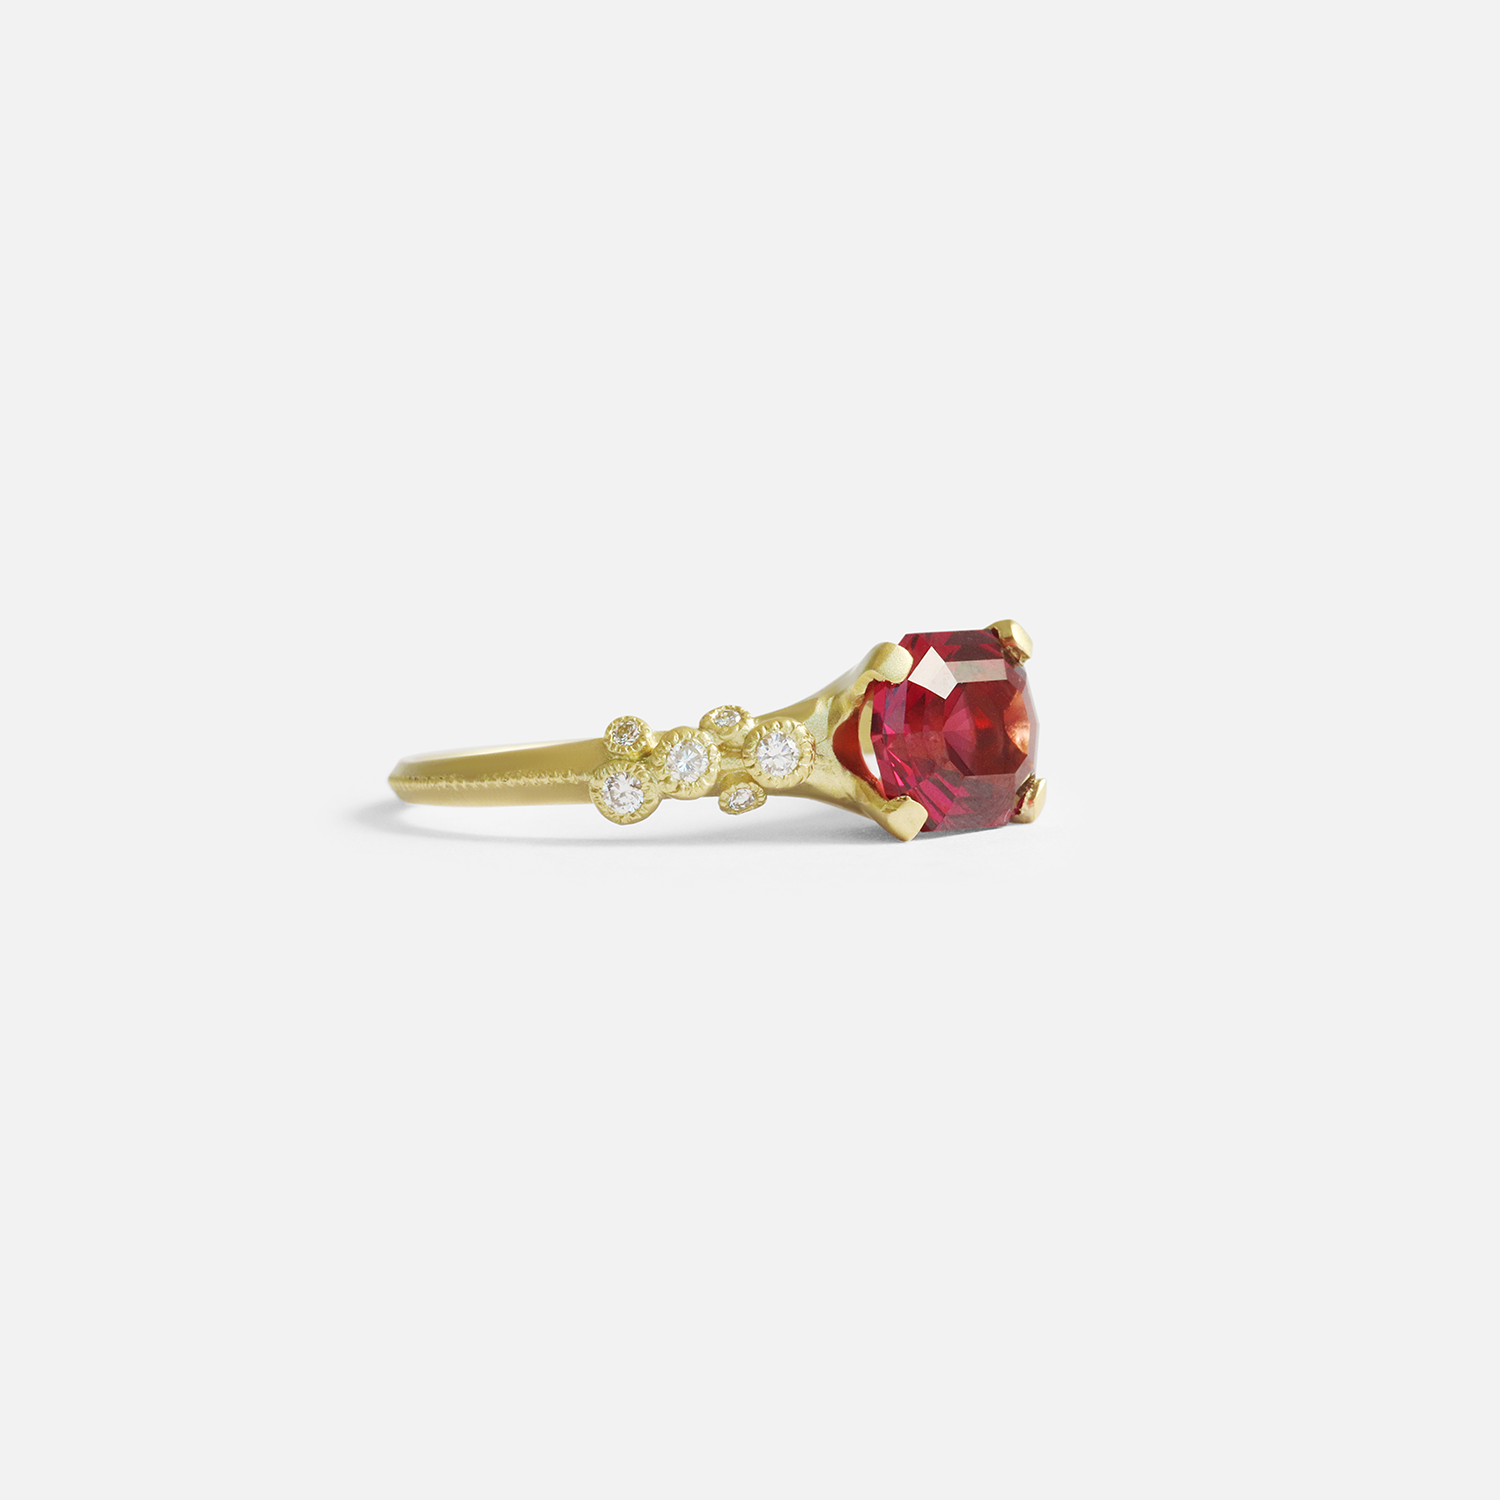 Melee E5 / Rhodolite Garnet By Hiroyo in Engagement Rings Category